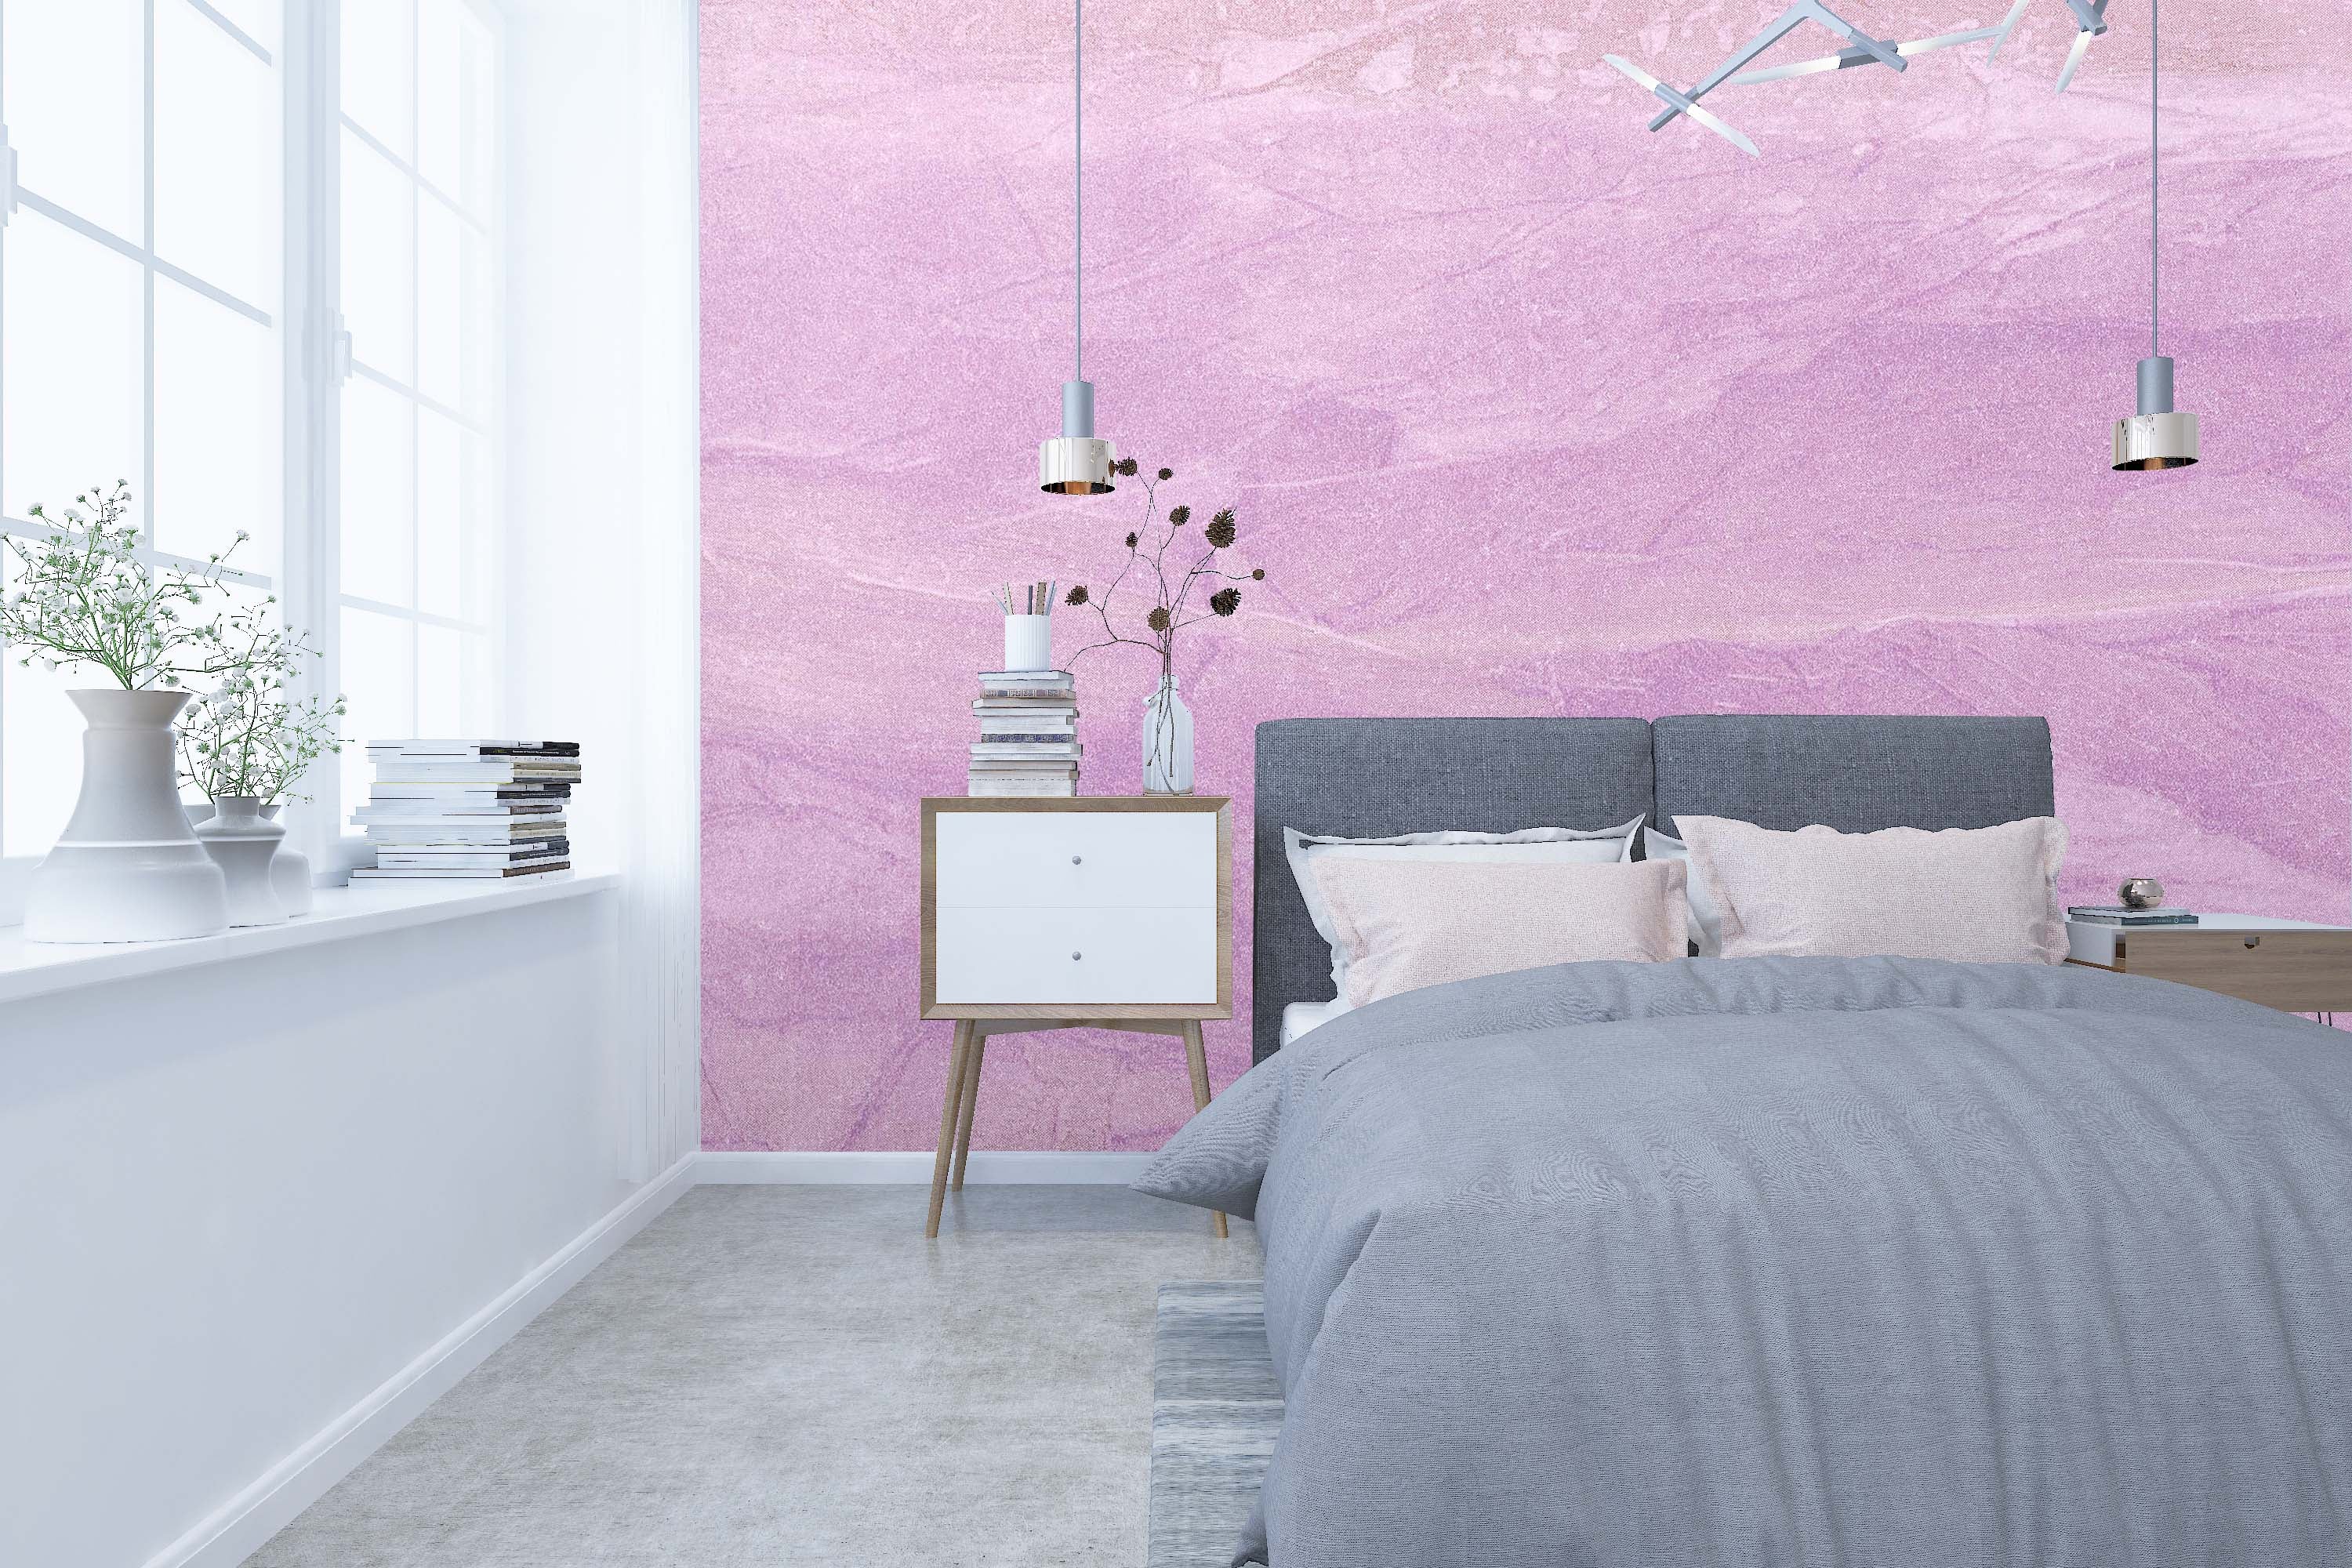 3D Pink Abstract Painting 91 Wall Murals